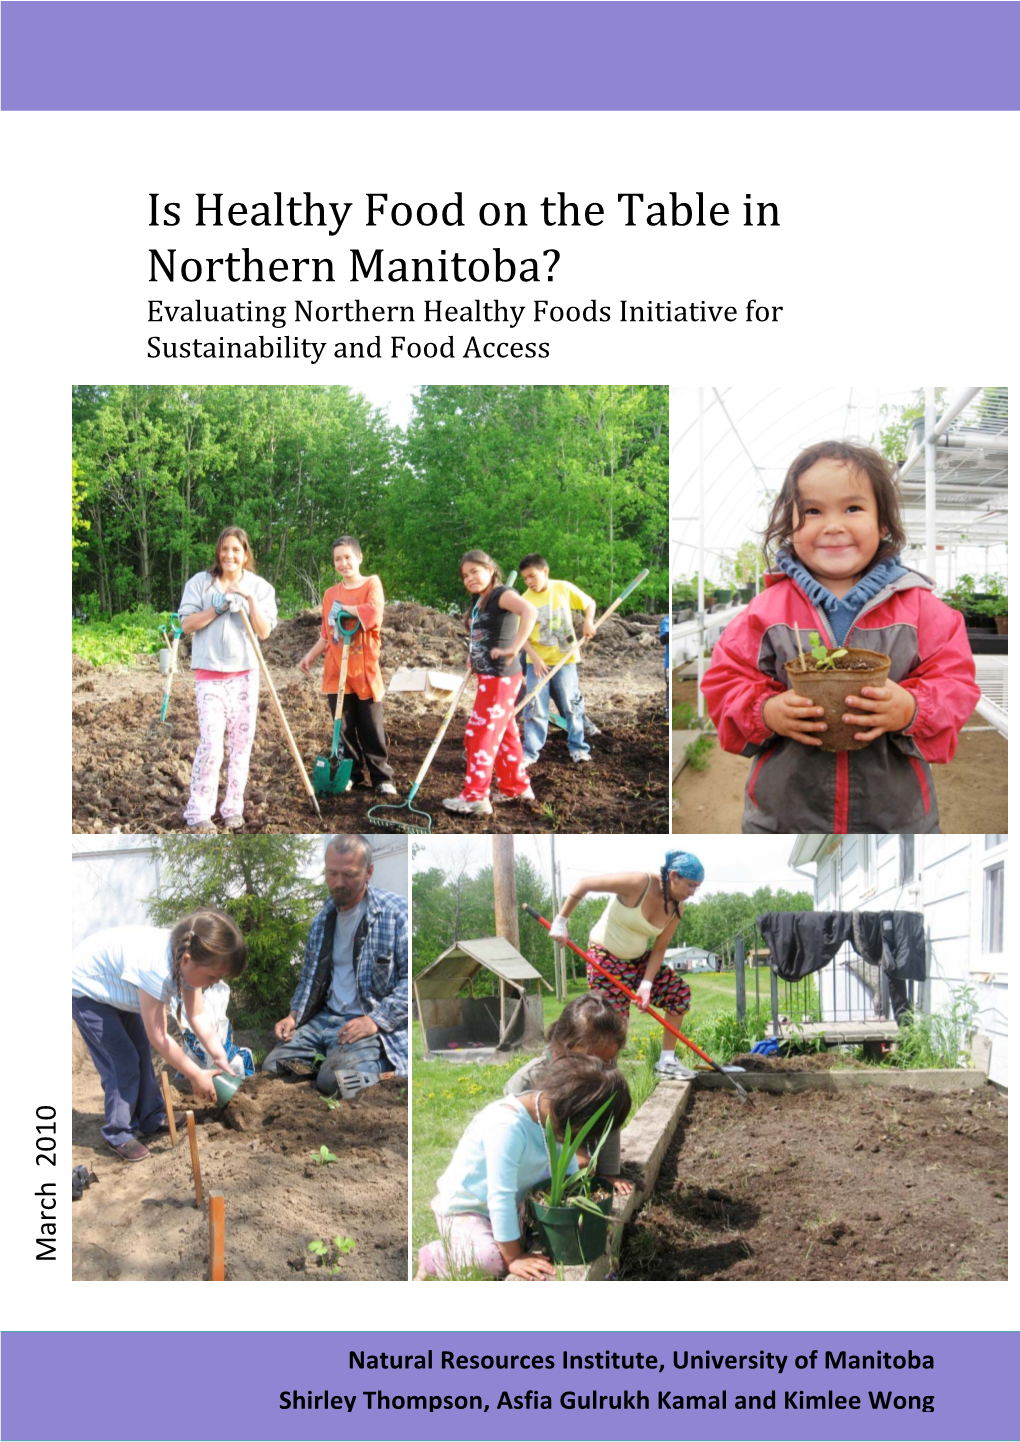 Is Healthy Food on the Table in Northern Manitoba?